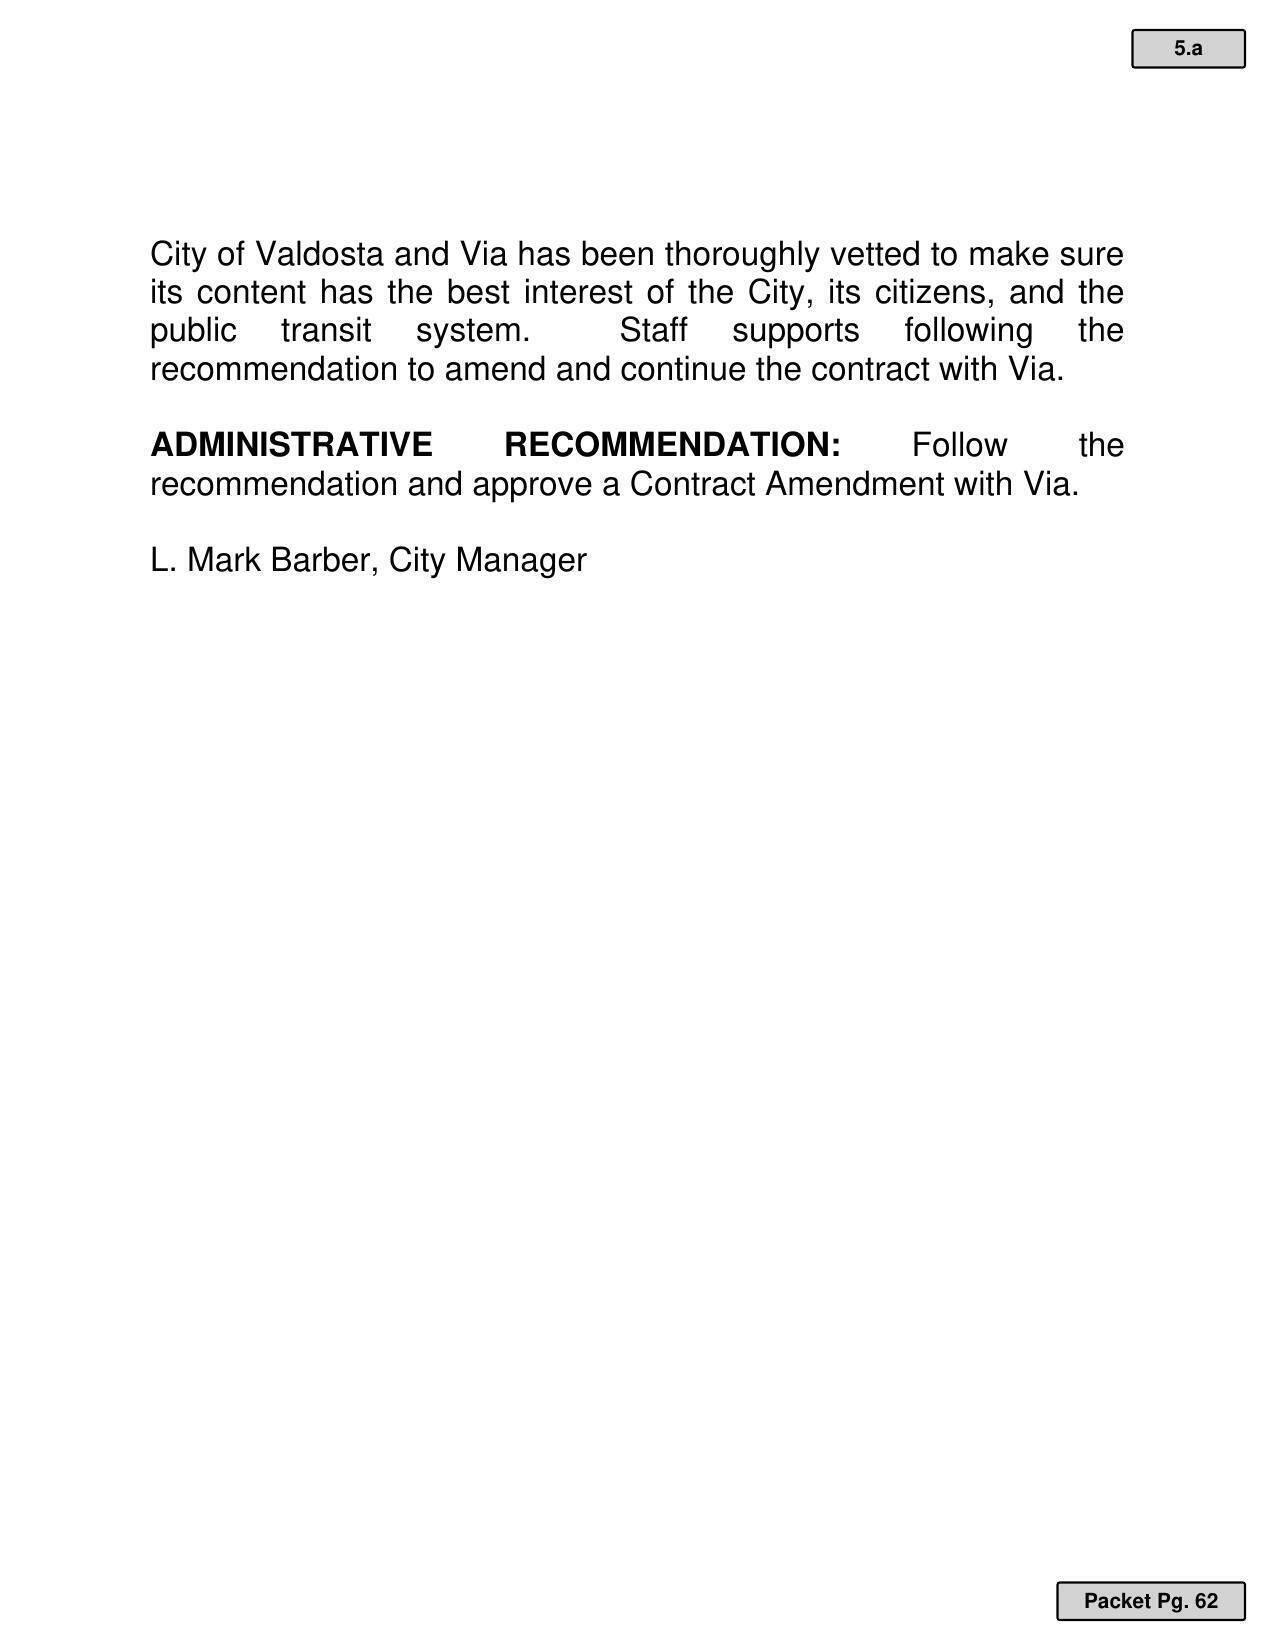 City of Valdosta and Via has been thoroughly vetted to make sure